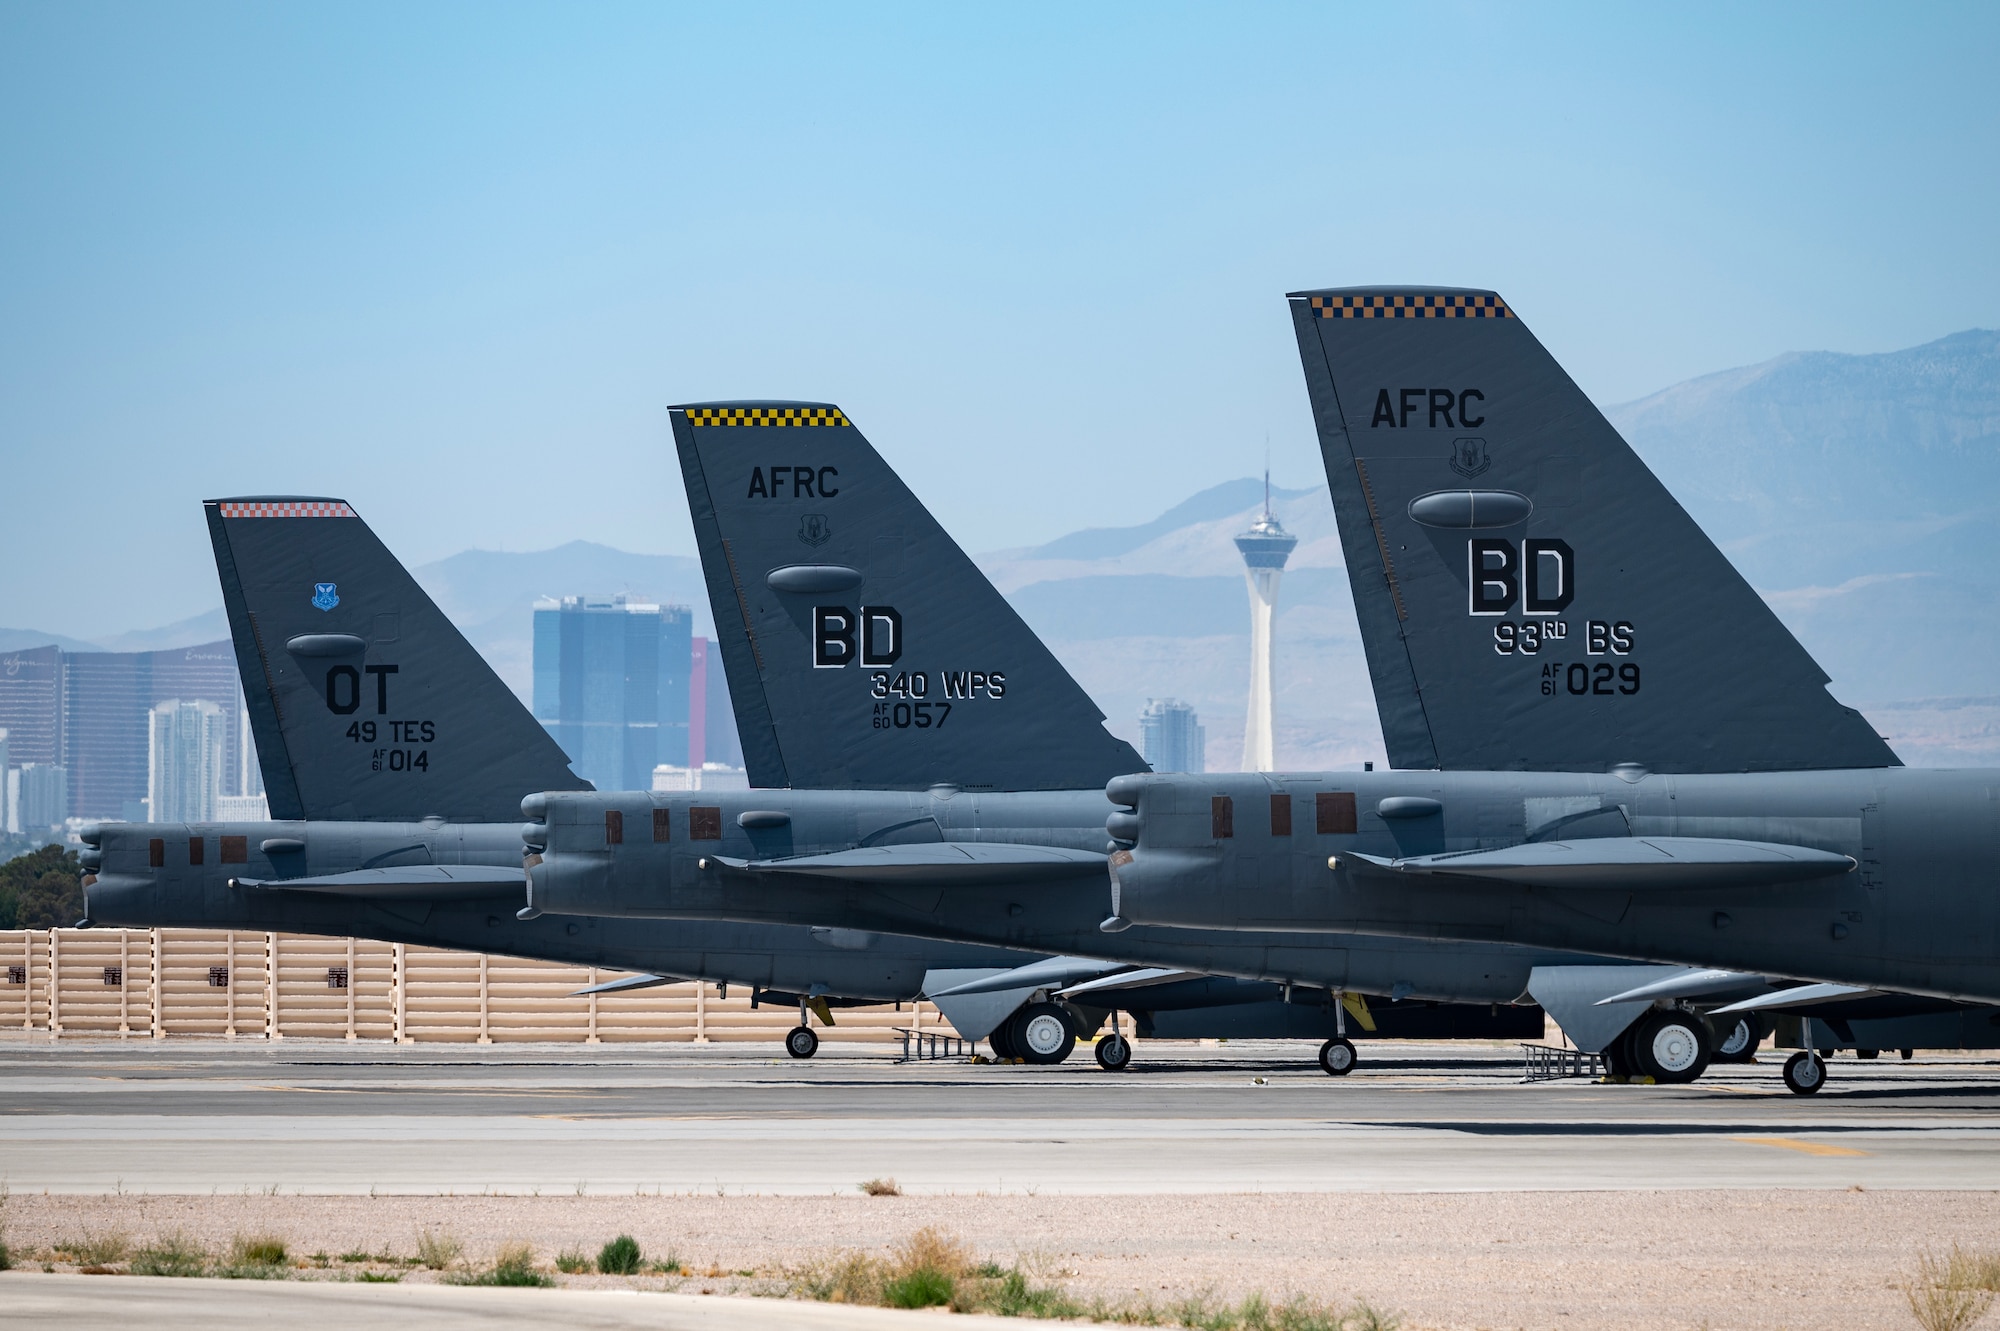 Three B-52 Stratofortress bombers sit on the ramp at Nellis Air Force Base, Nevada, May 31, 2023. The B-52s are at Nellis in support of the Weapons School Integration exercise. The U.S. Air Force Weapons School teaches graduate-level instructor courses that provide advanced training in weapons and tactics employment to officers and enlisted specialists of the combat and mobility air forces. (U.S. Air Force photo by William R. Lewis)